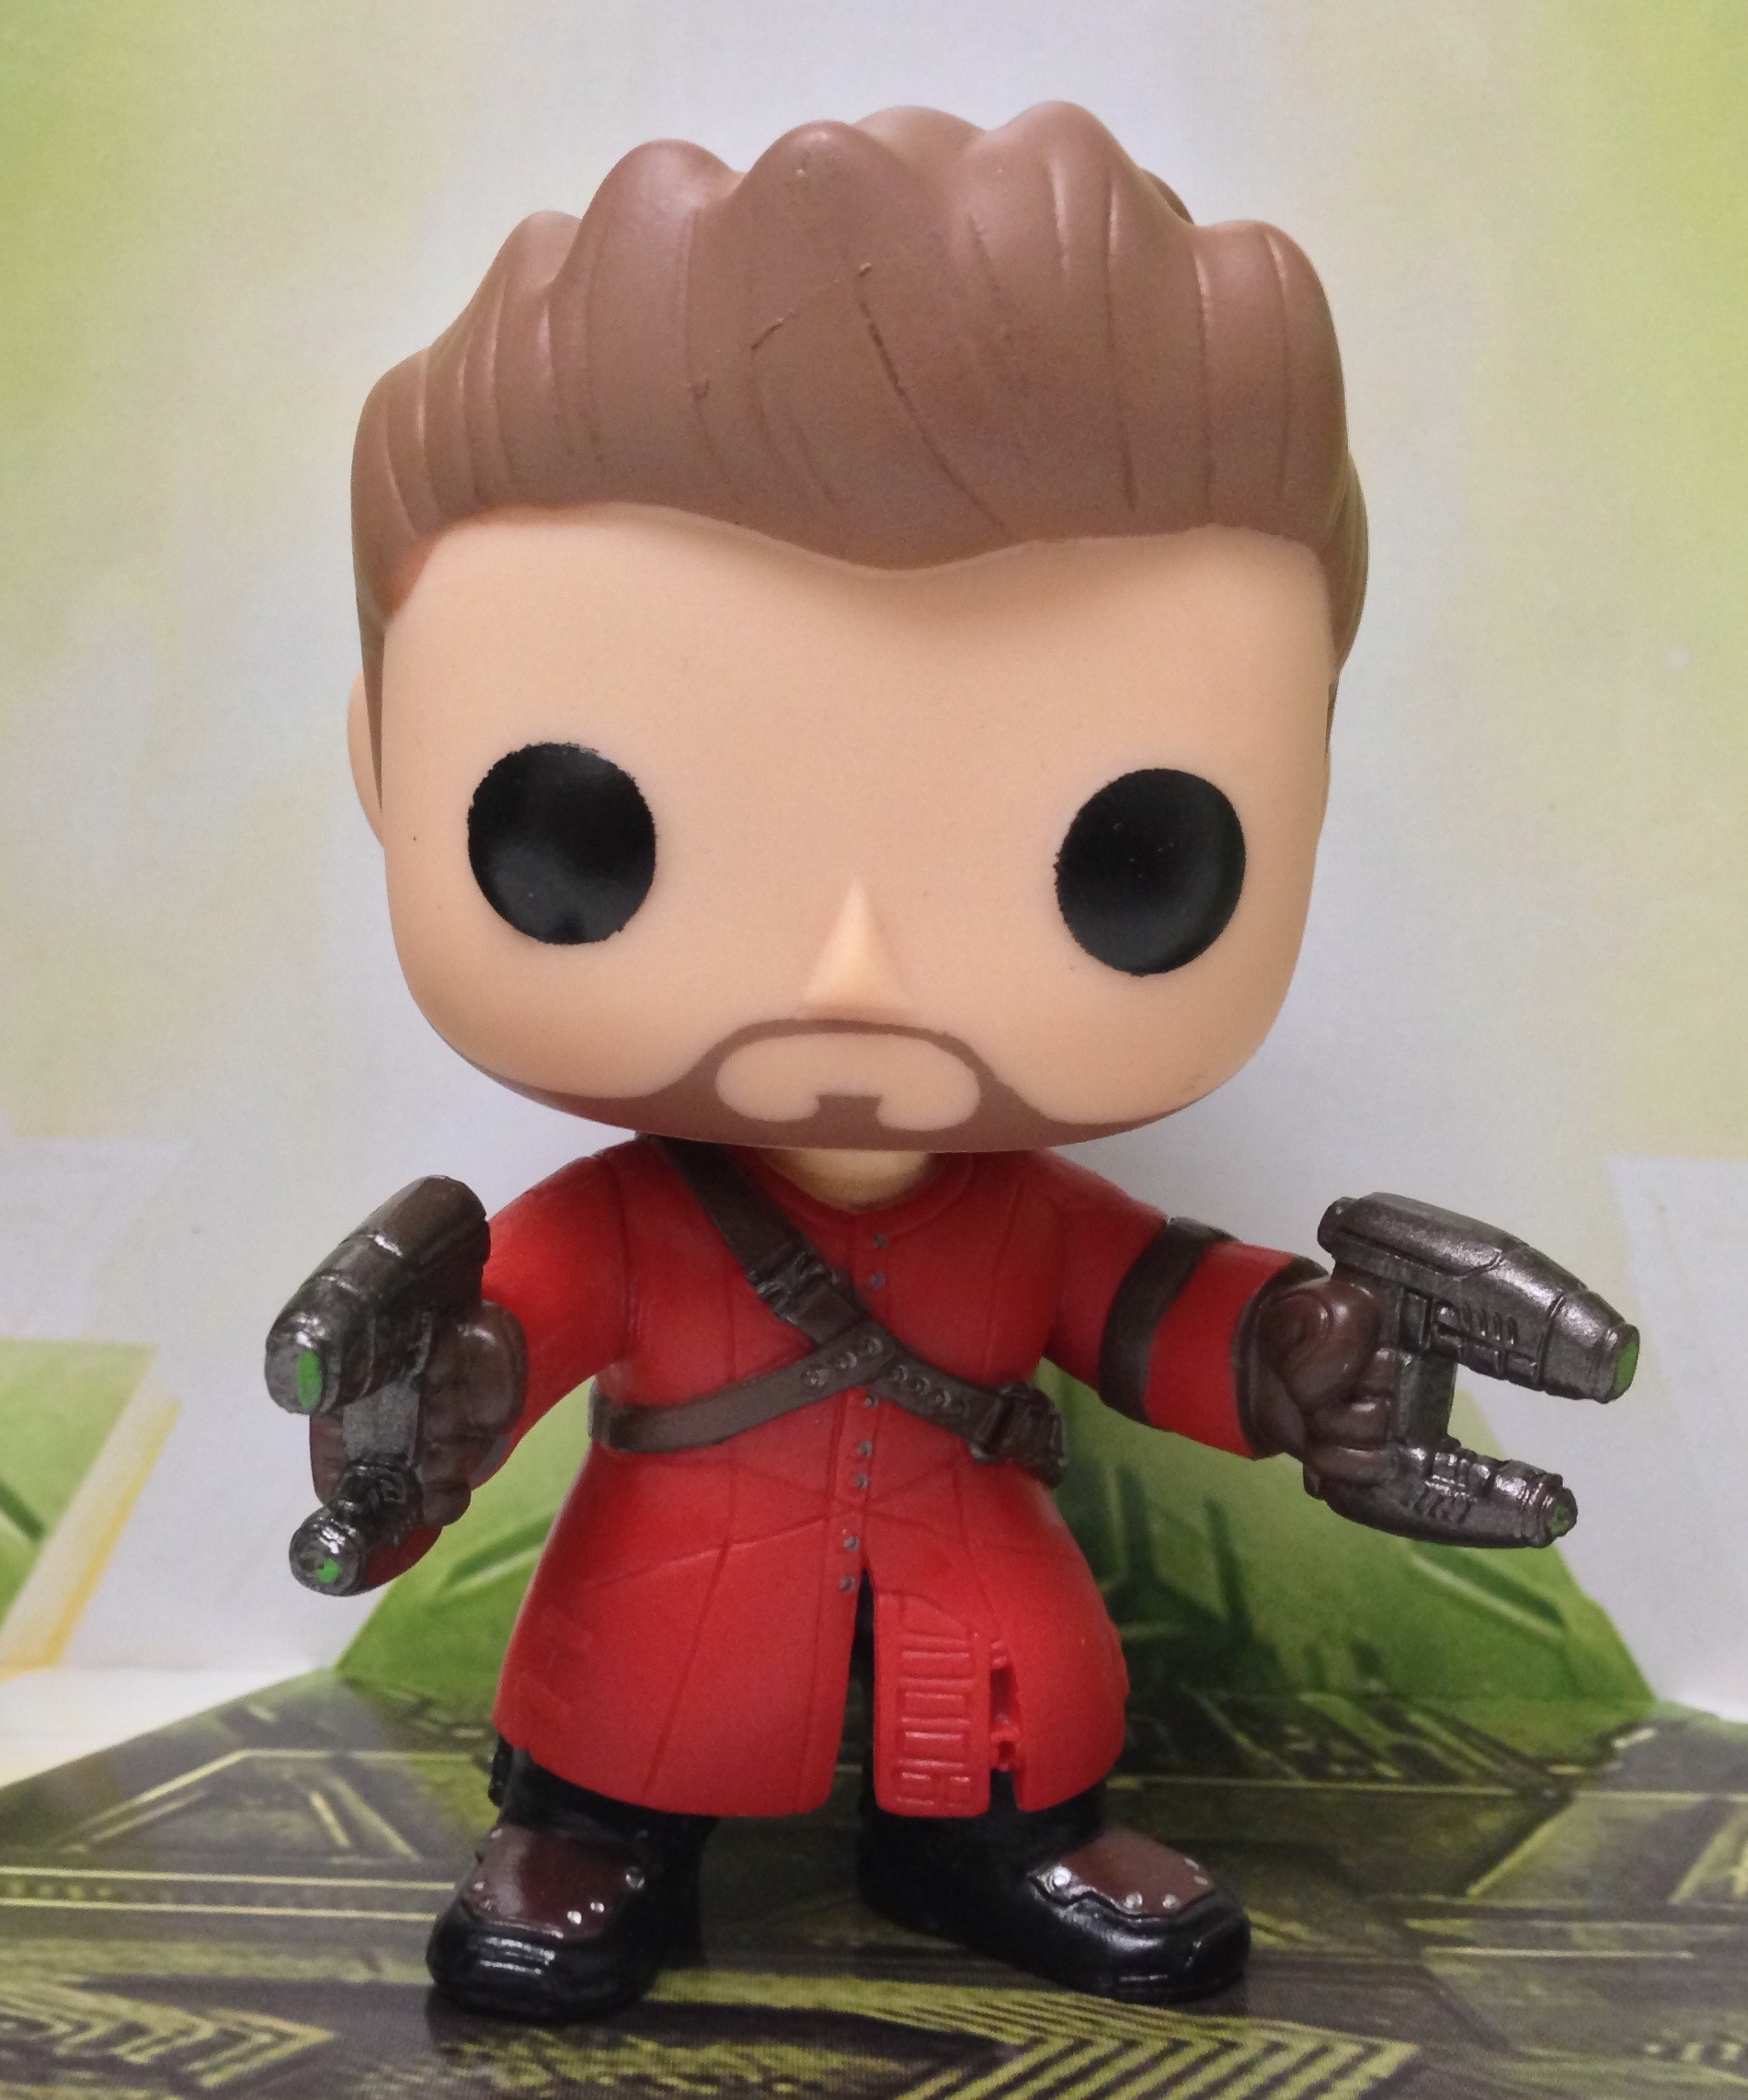 Funko POP! Vinyls Unmasked Star-Lord Review & Photos - Marvel Toy News